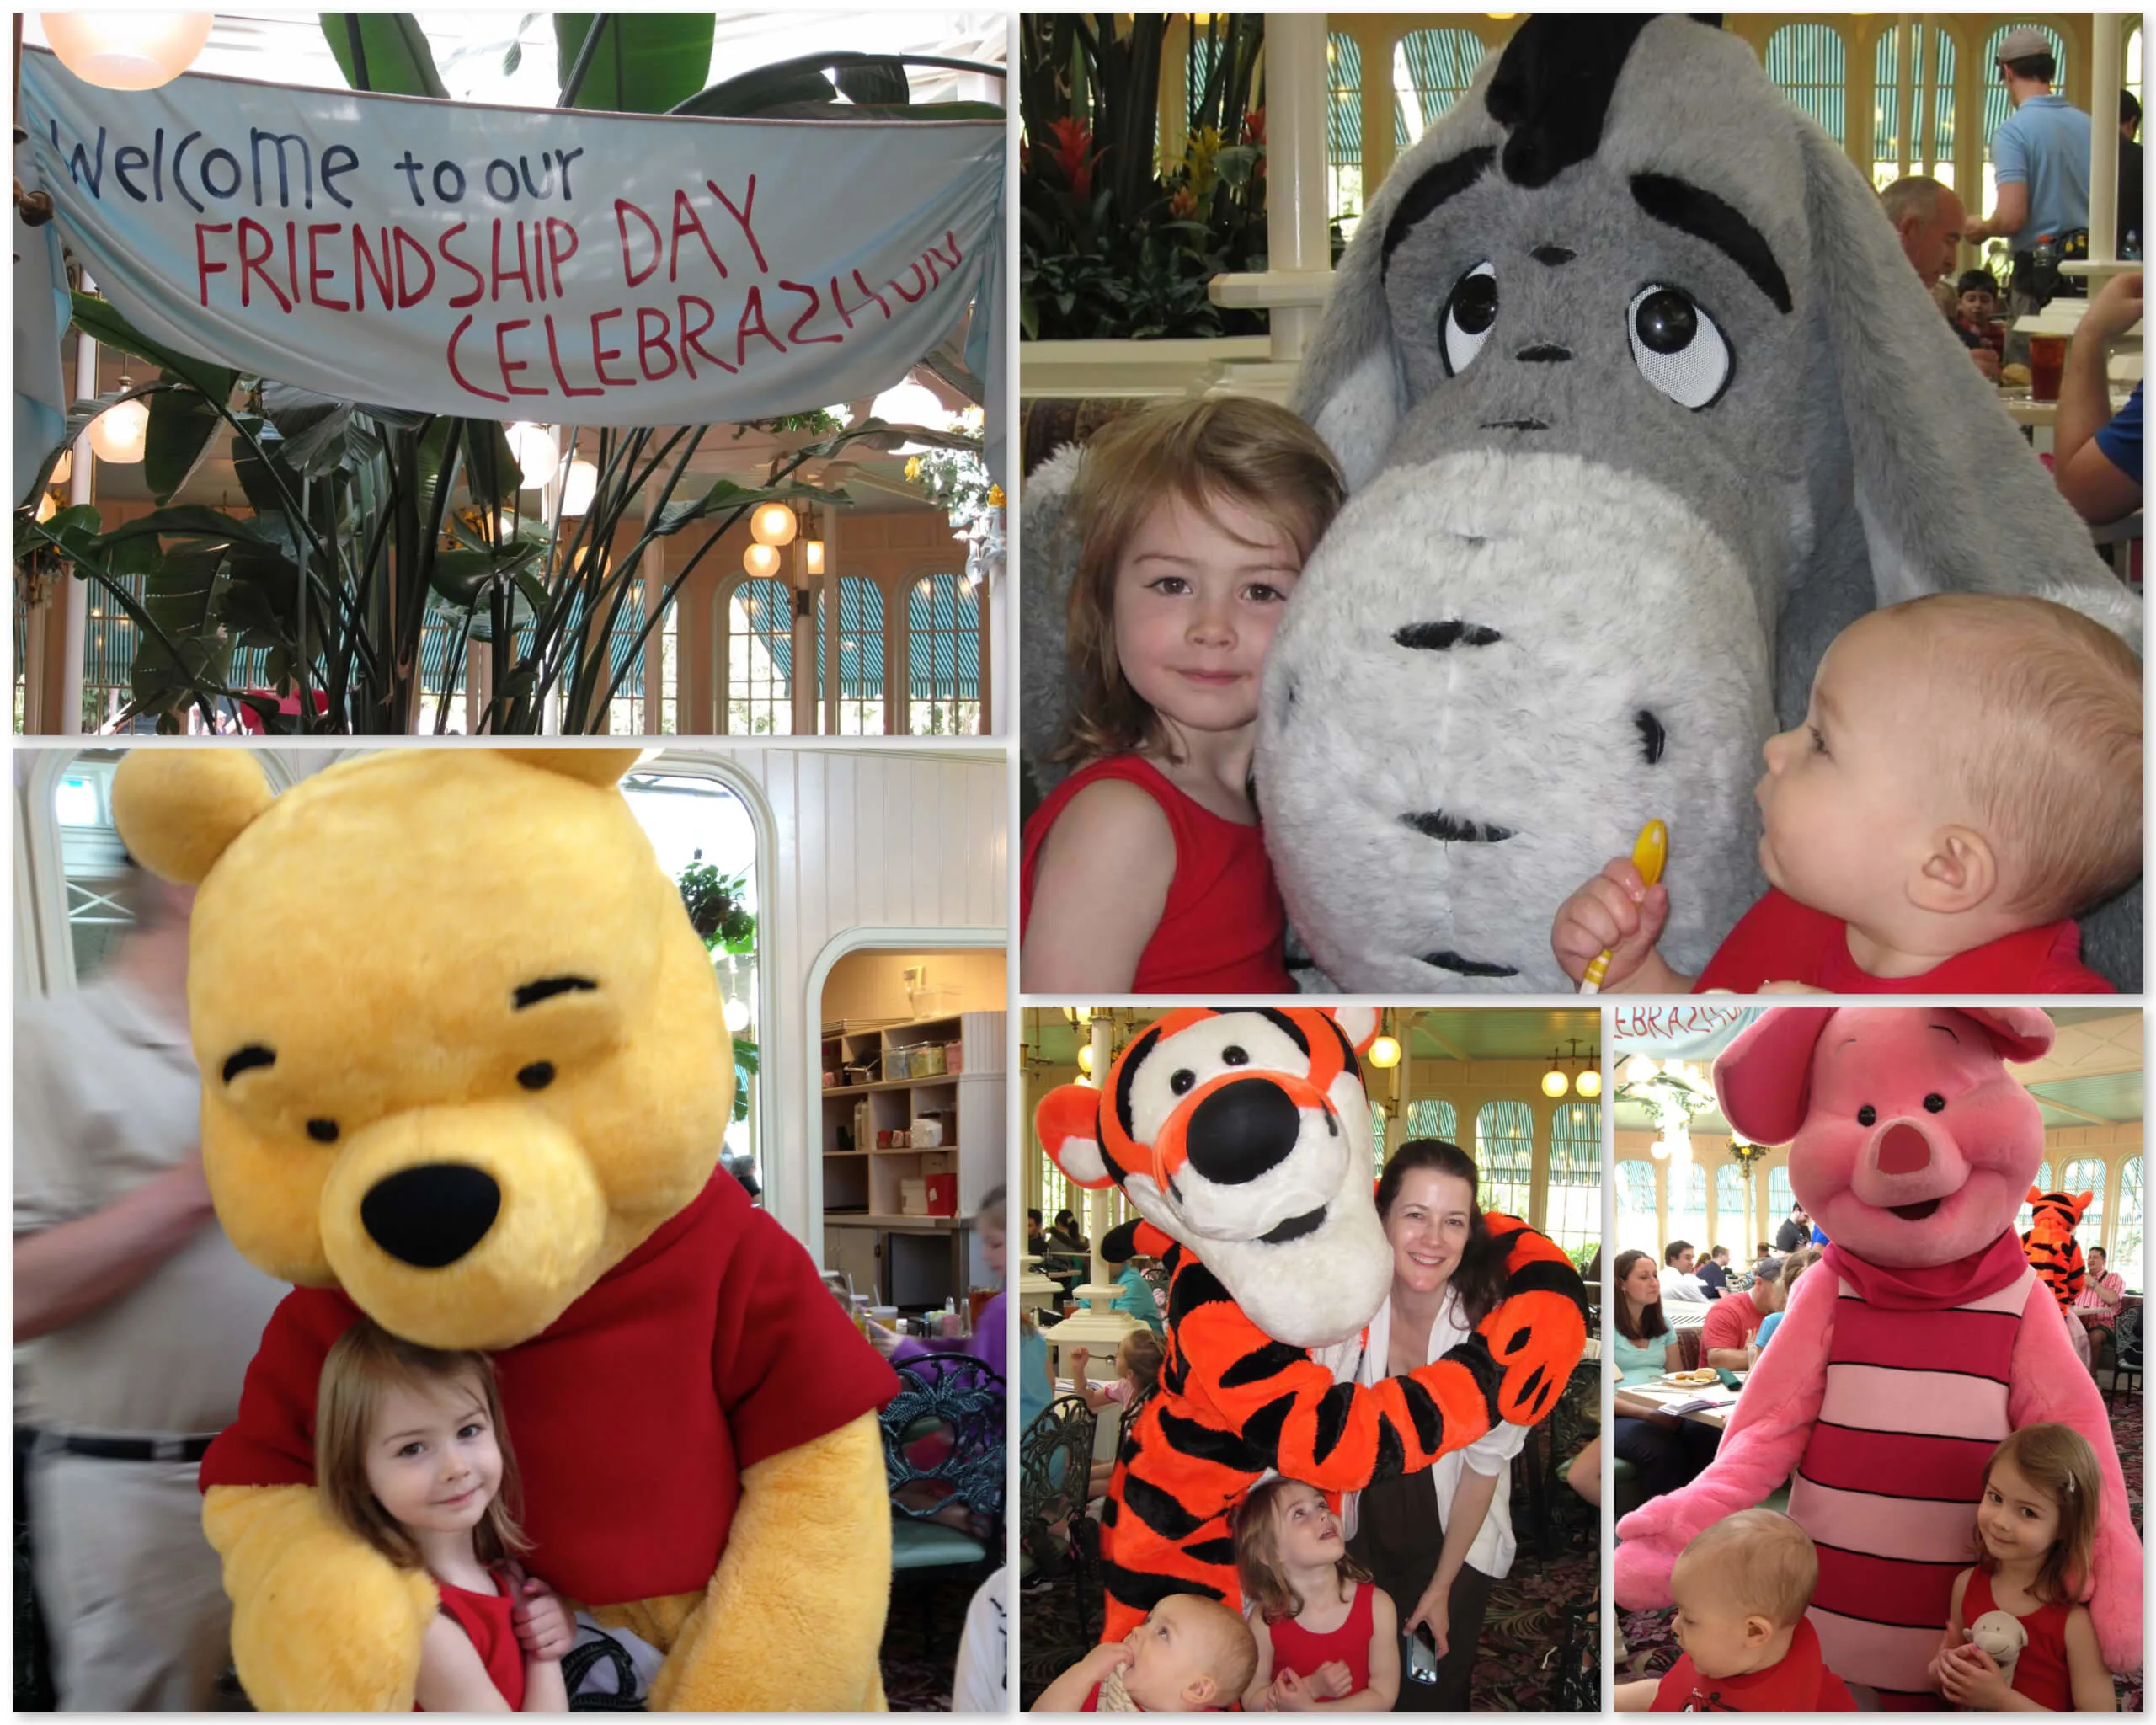 Friendship Day Celebration at Disney - copyright Merriment Design Co. Do not use without written permission.